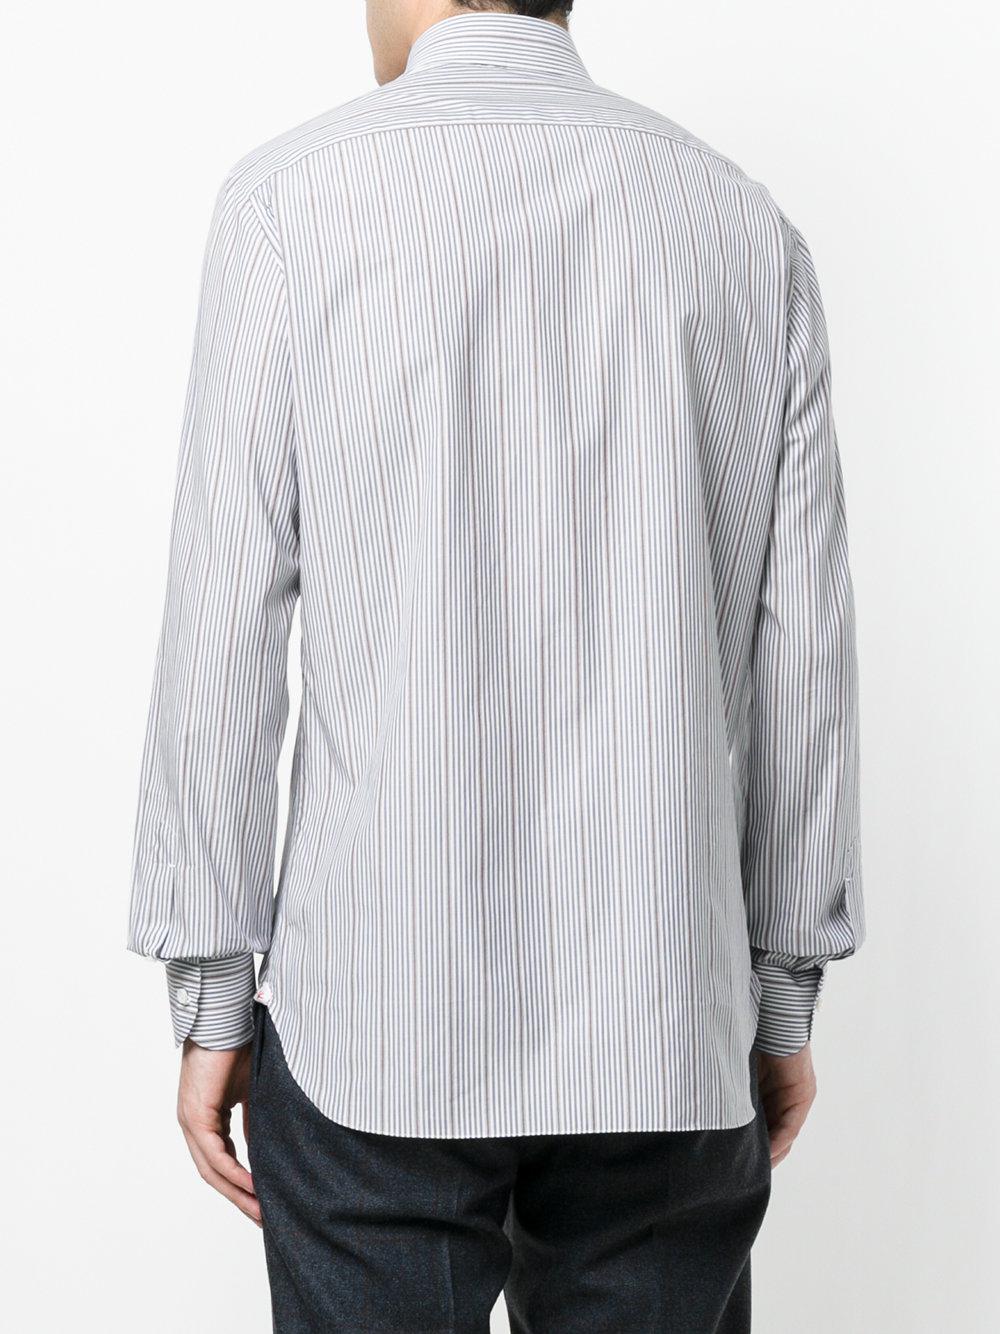 Lyst - Isaia Pinstripe Shirt in Blue for Men